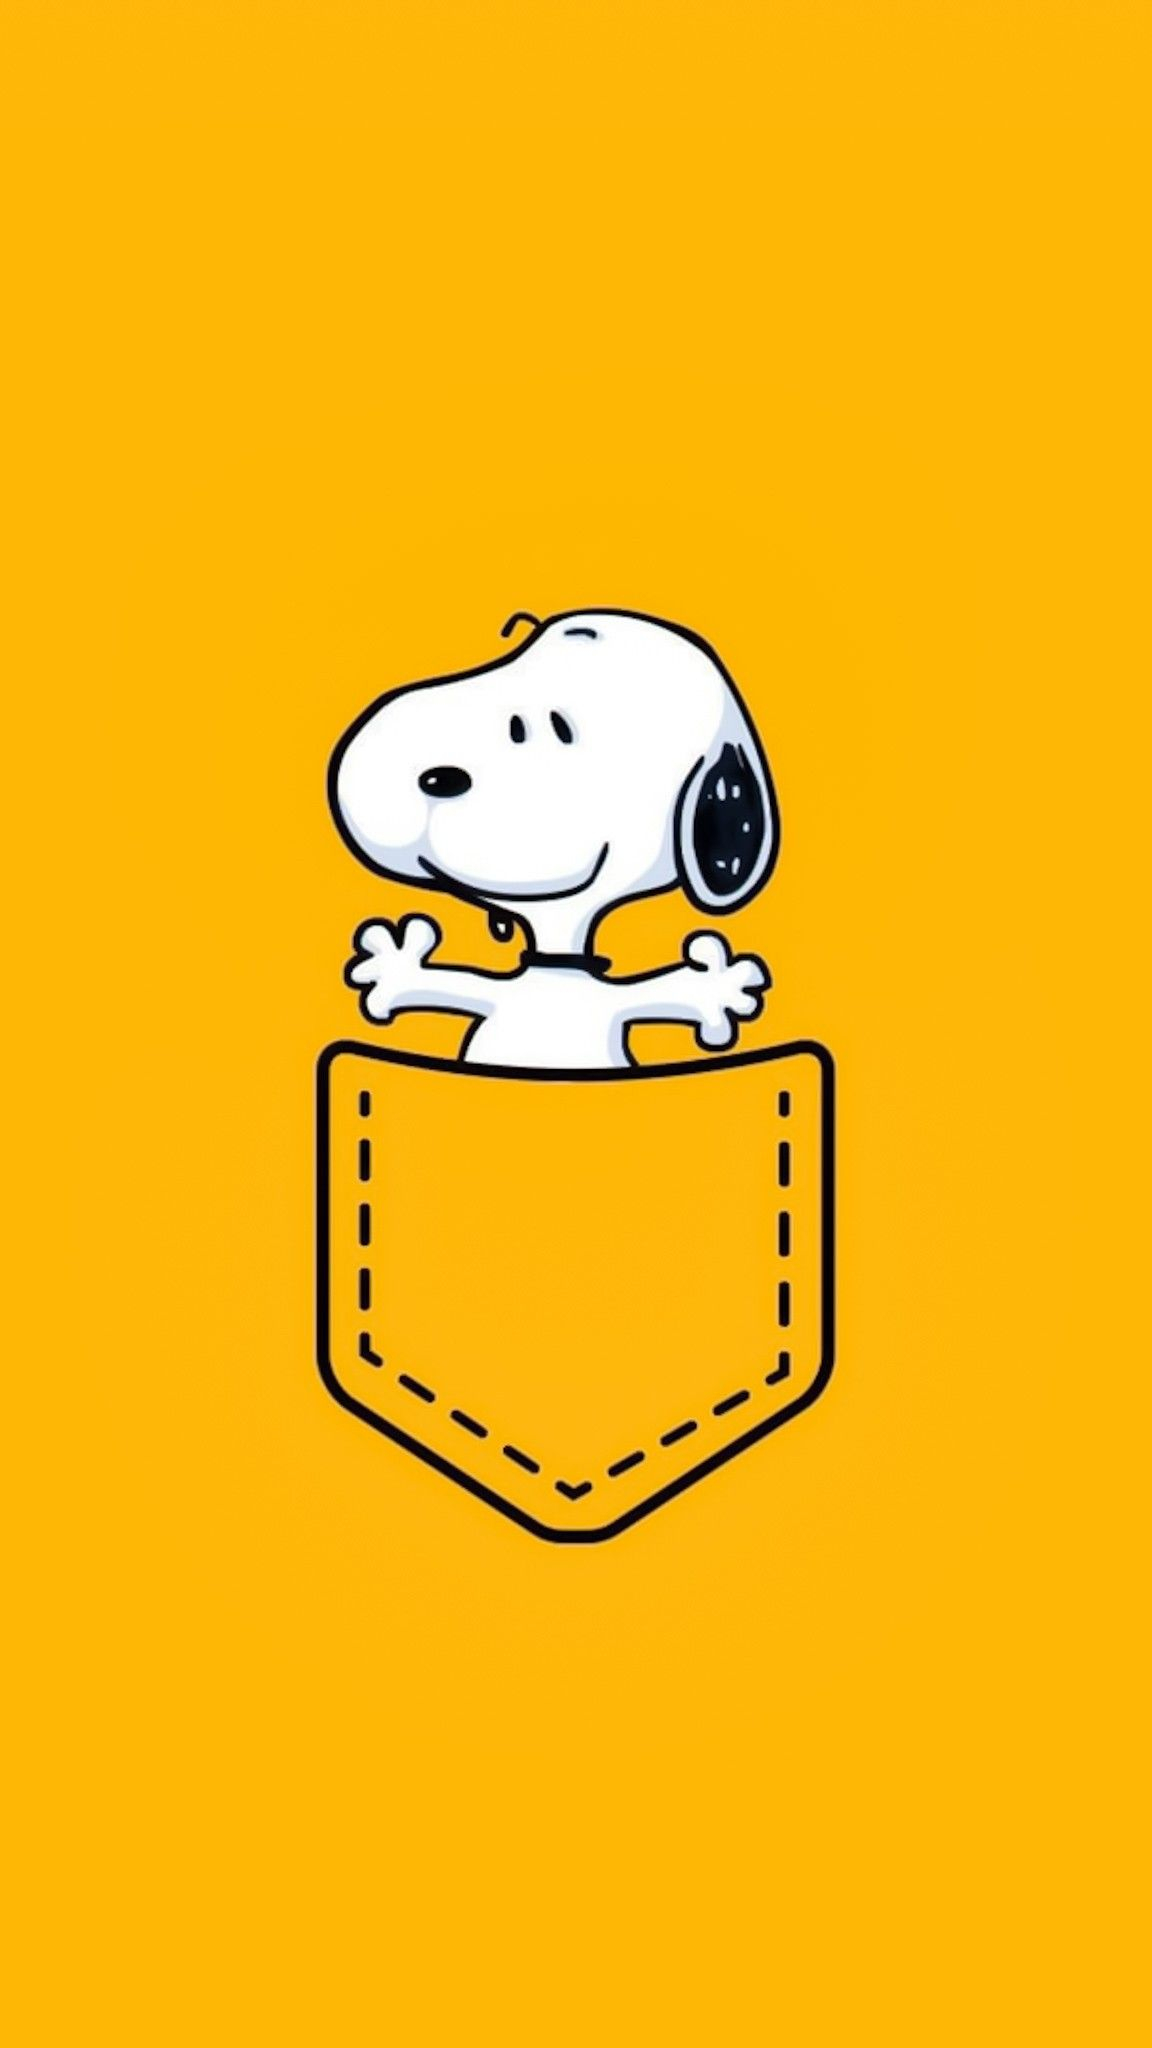 1152x2048 Pin by Aekkalisa on Snoopy | Snoopy wallpaper, Peanuts wallpaper, Snoopy